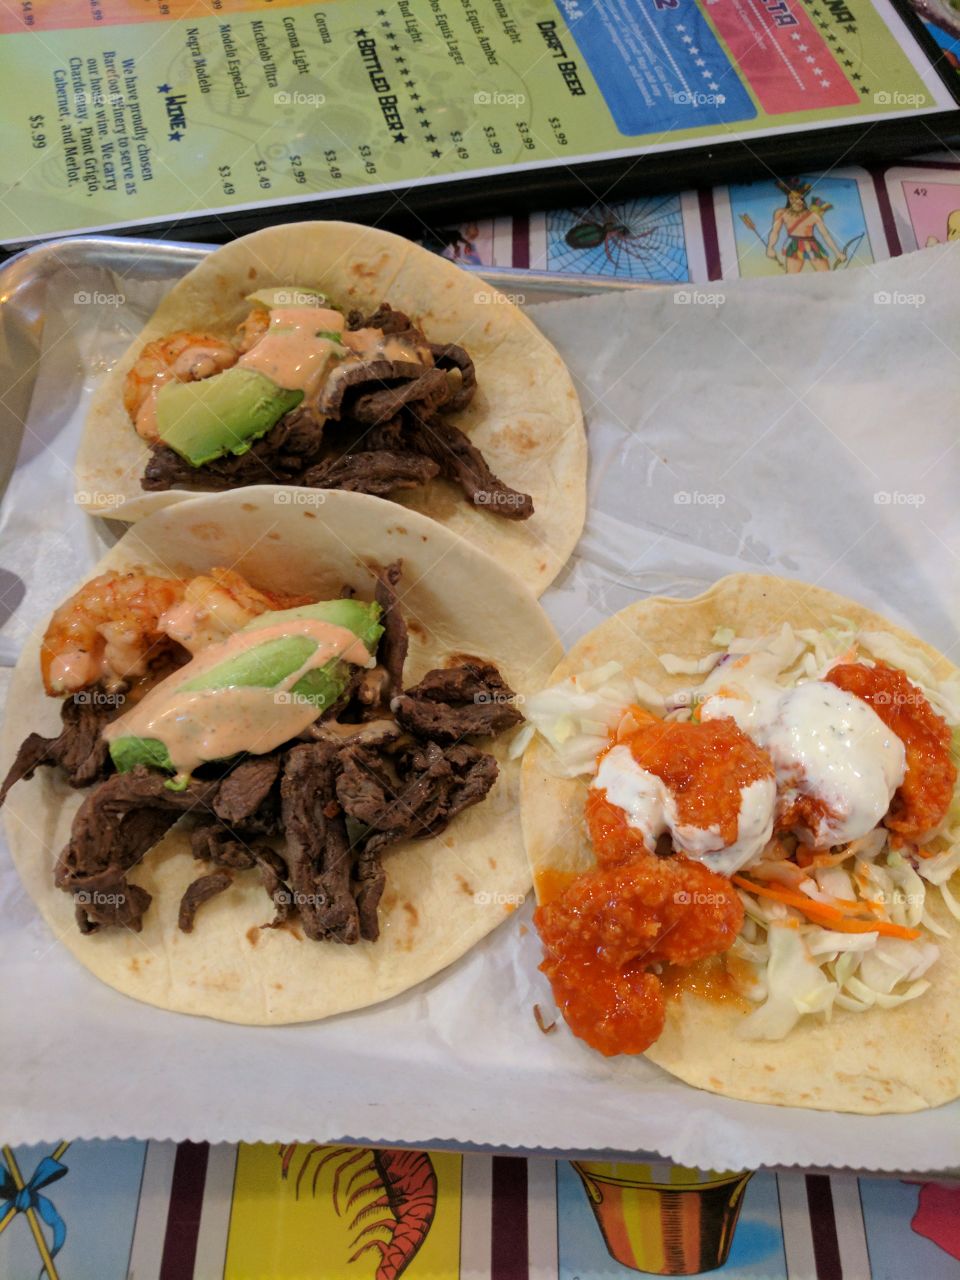 taco time
surf and turf wow